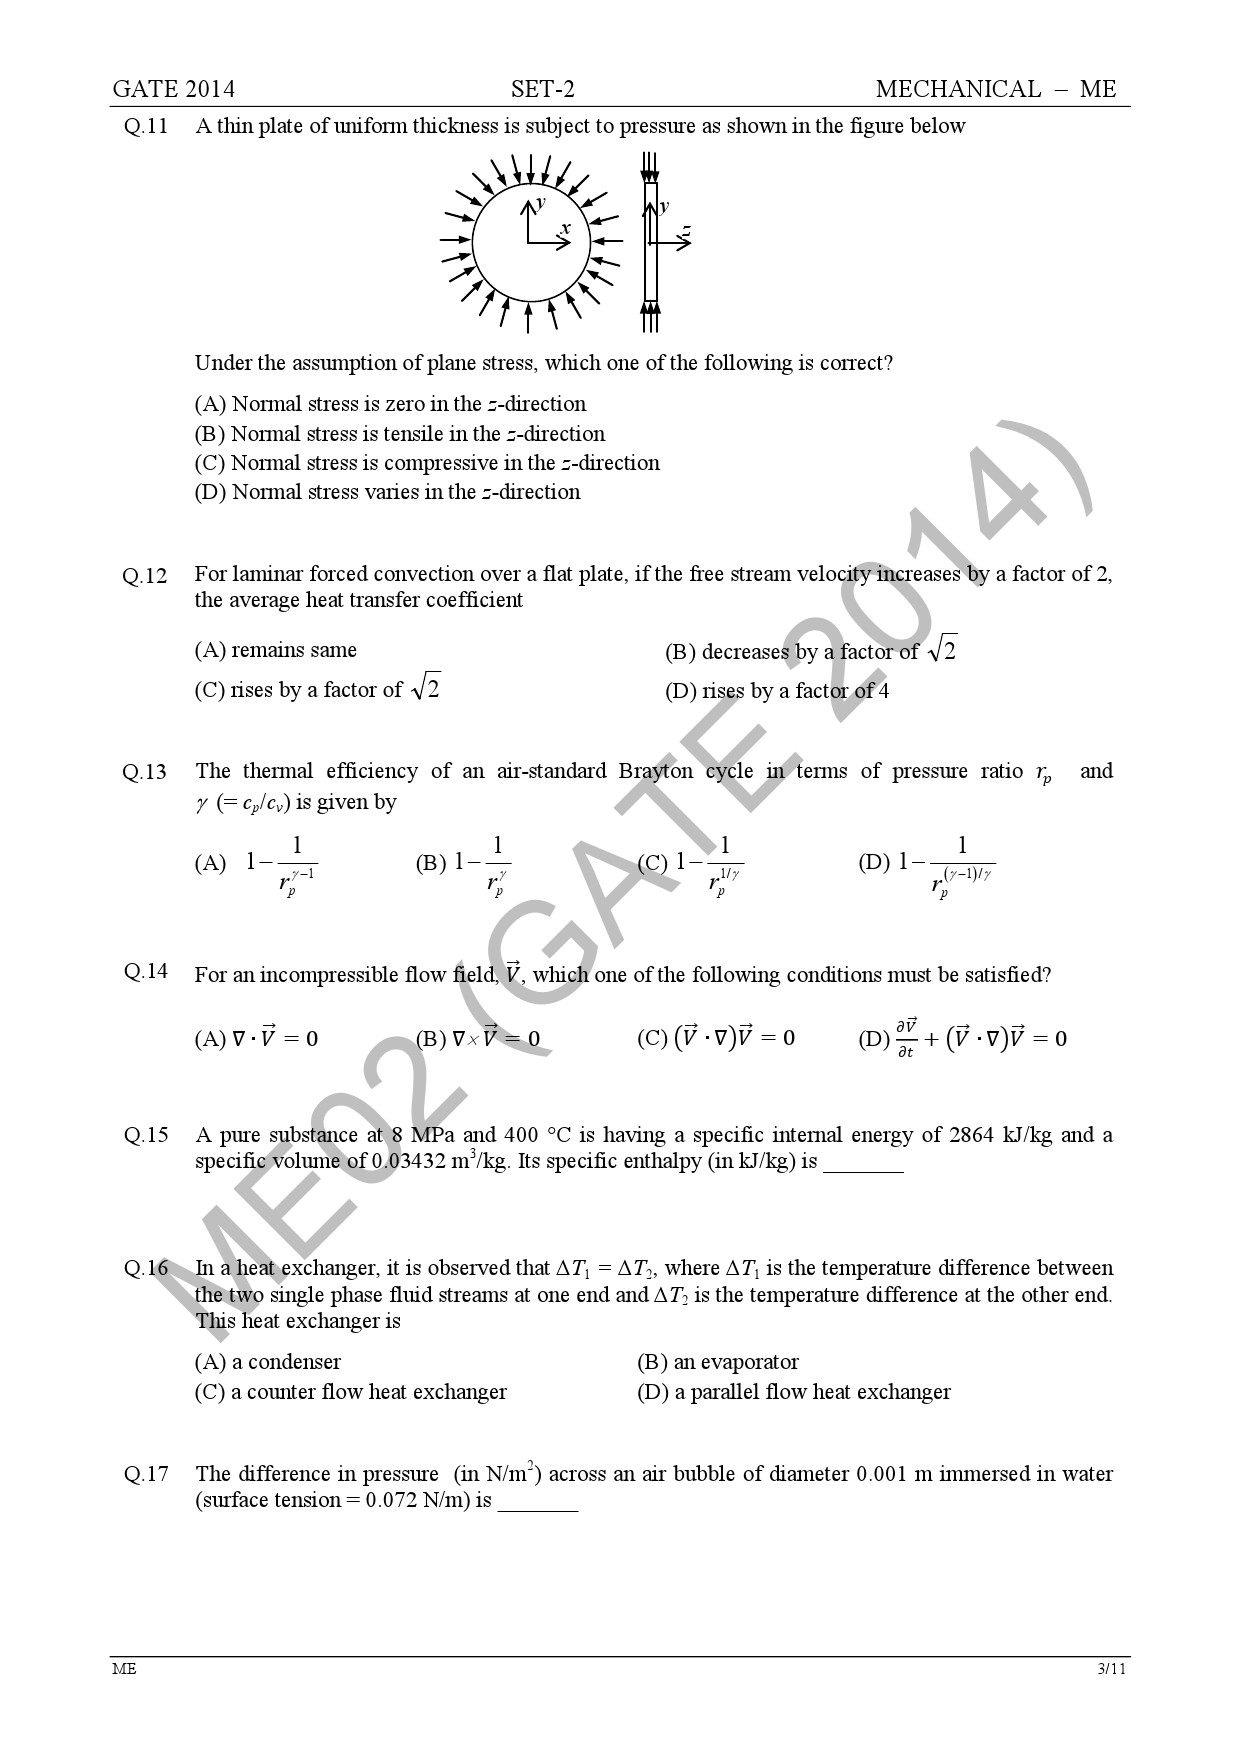 GATE Exam Question Paper 2014 Mechanical Engineering Set 2 9